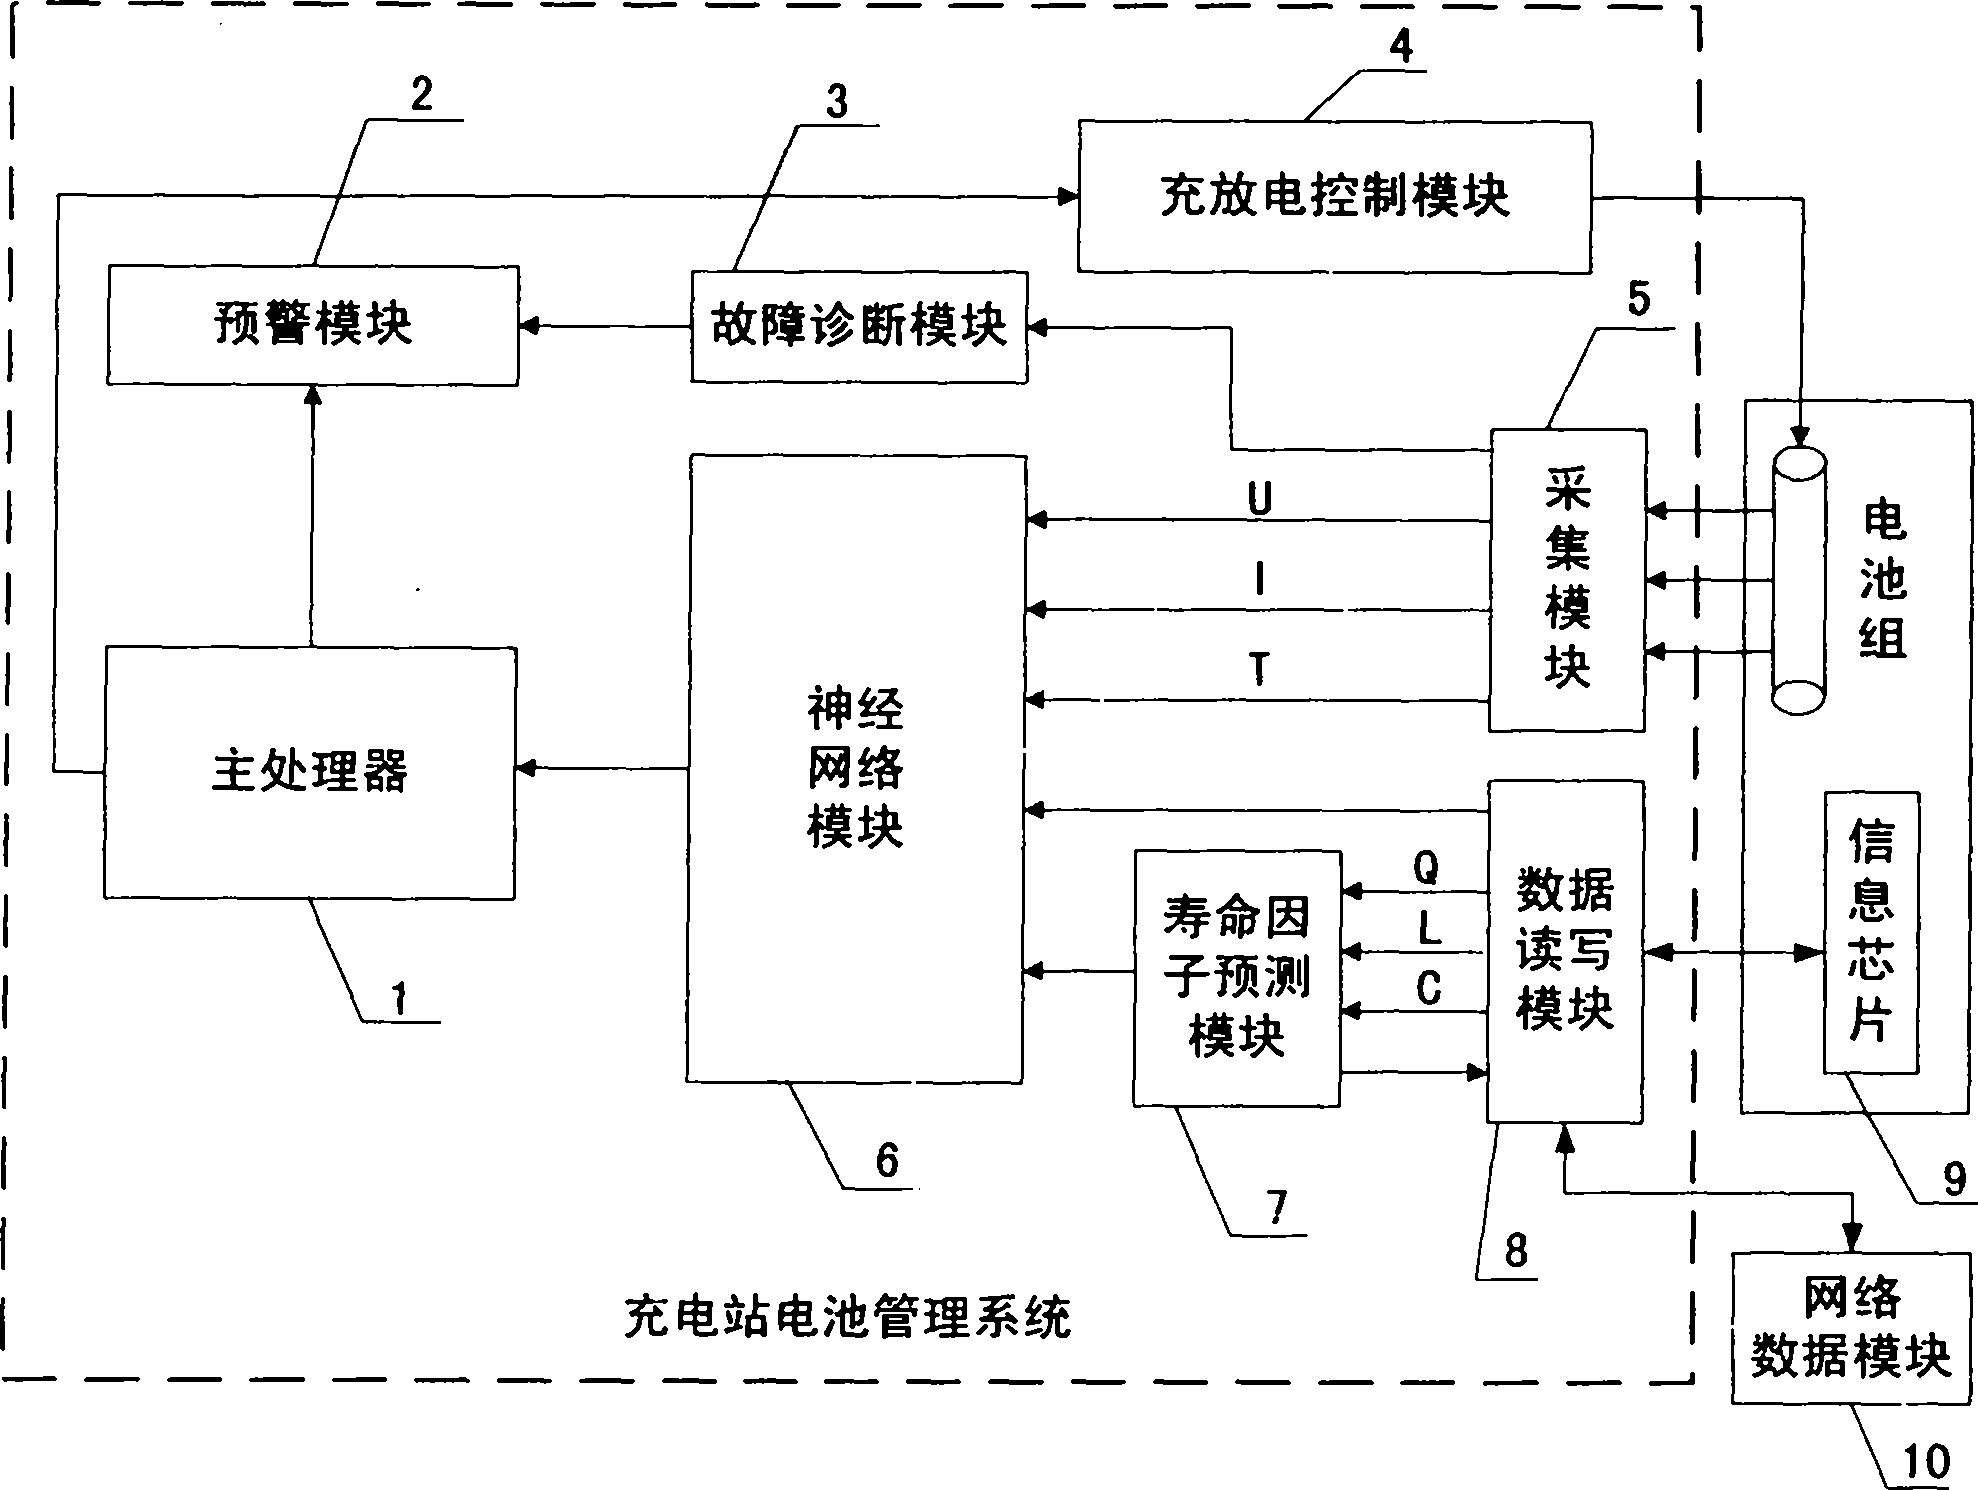 Evaluation method for system on chip (SOC) of charging station battery